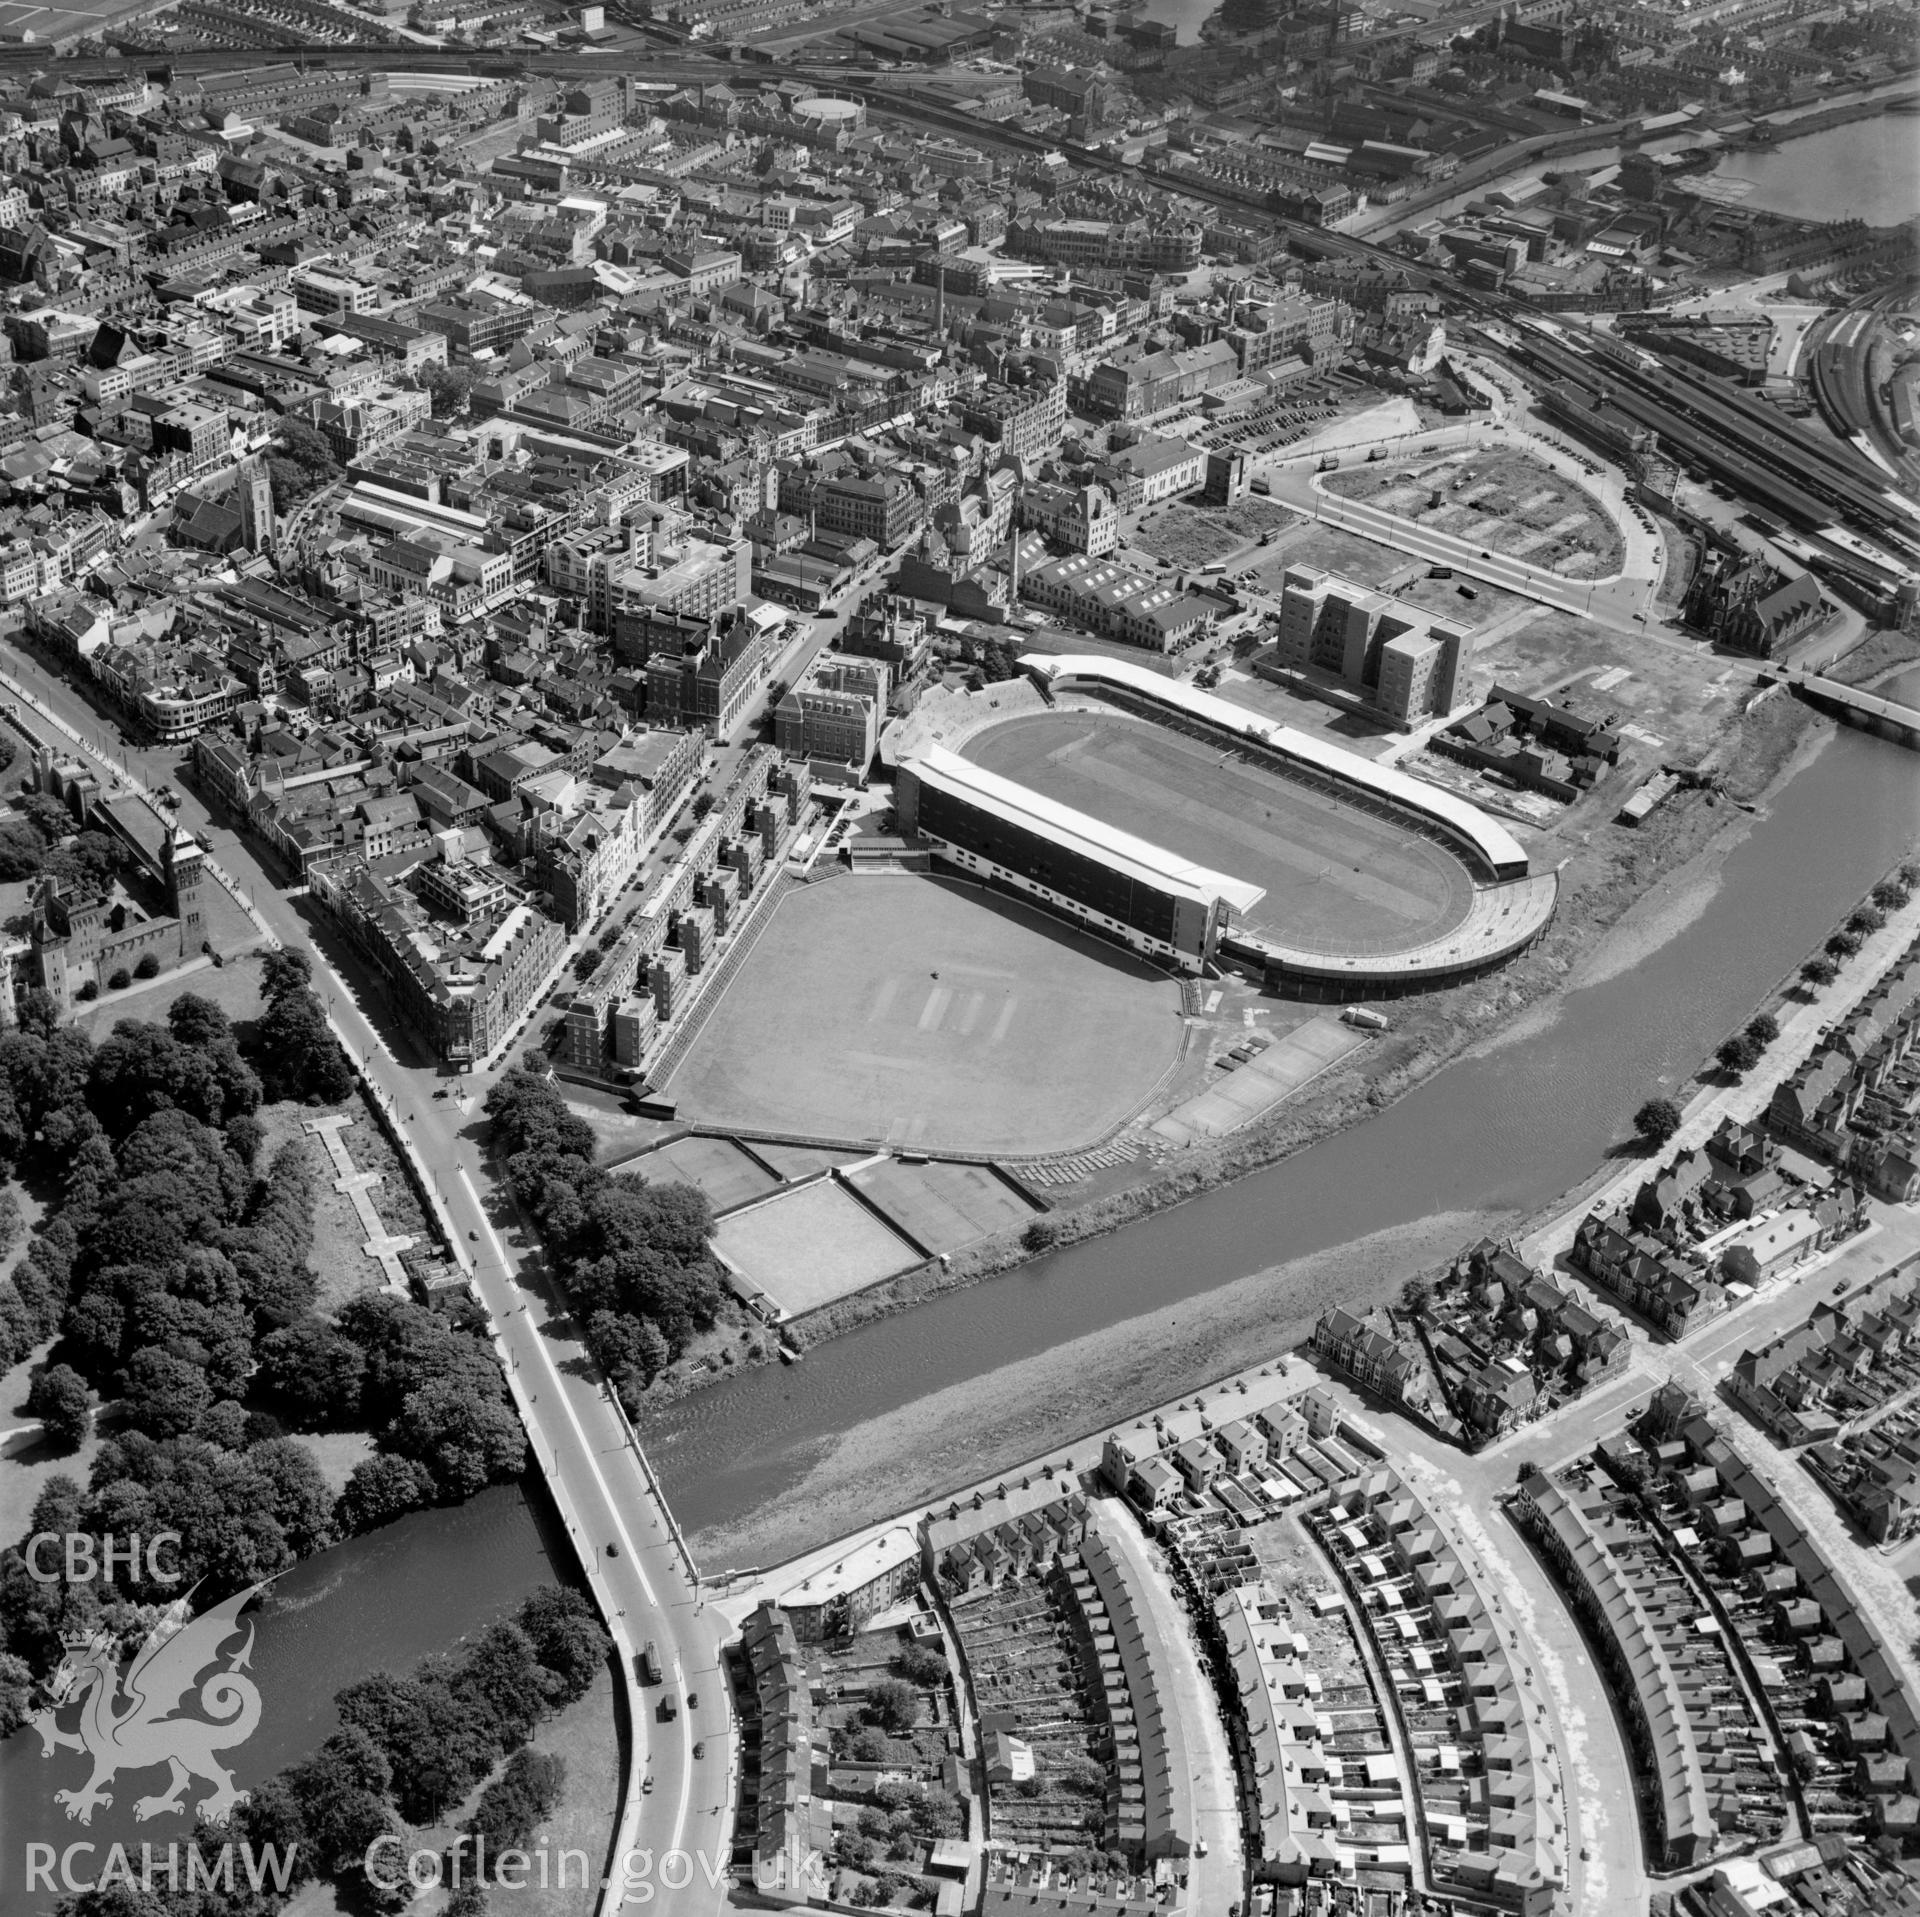 General view of Cardiff showing Arms Park